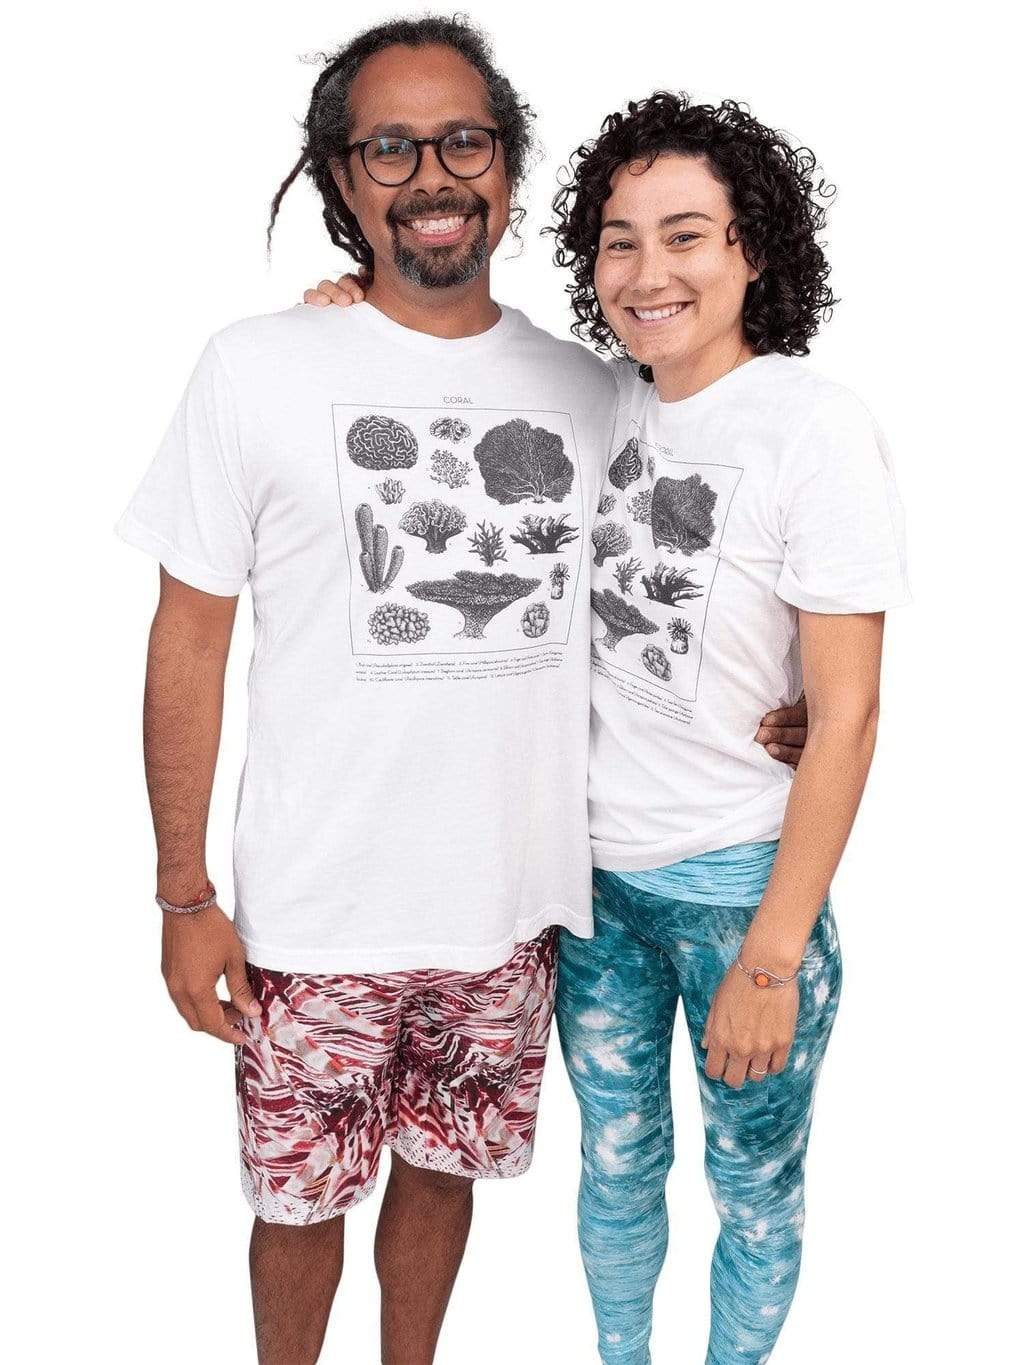 Model: Rolando is a seascape and fisheries ecologist and Adyan is a fisheries biologist. He is 5&#39;9, 190 lbs and is wearing a size L, and she is 5&#39;7, 130 lbs and is wearing a size XS.